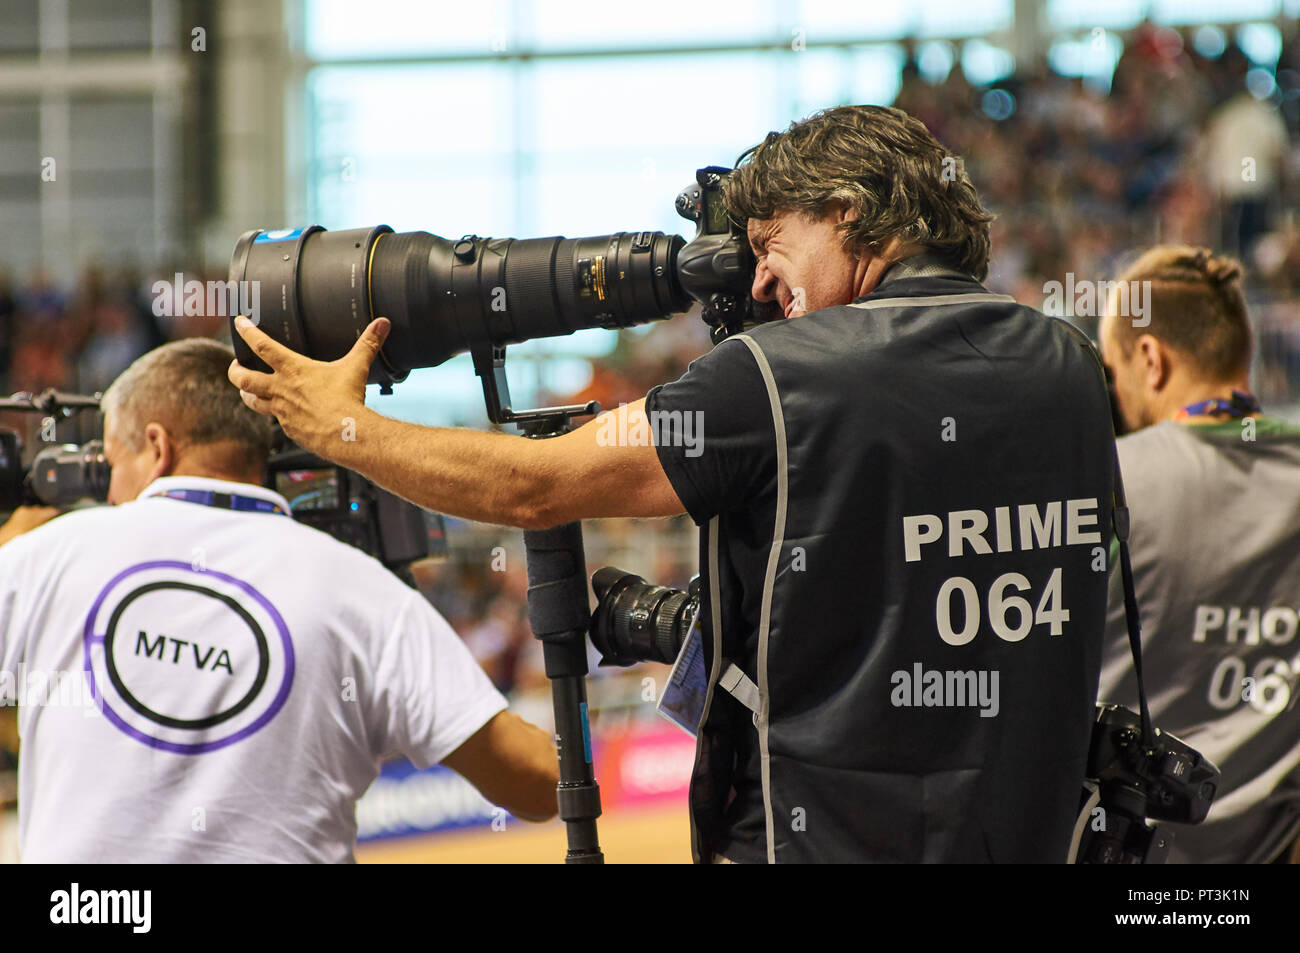 Press photographer photographing the track race using a Nikon telephoto lens during European Championships in Glasgow in 2018. Stock Photo